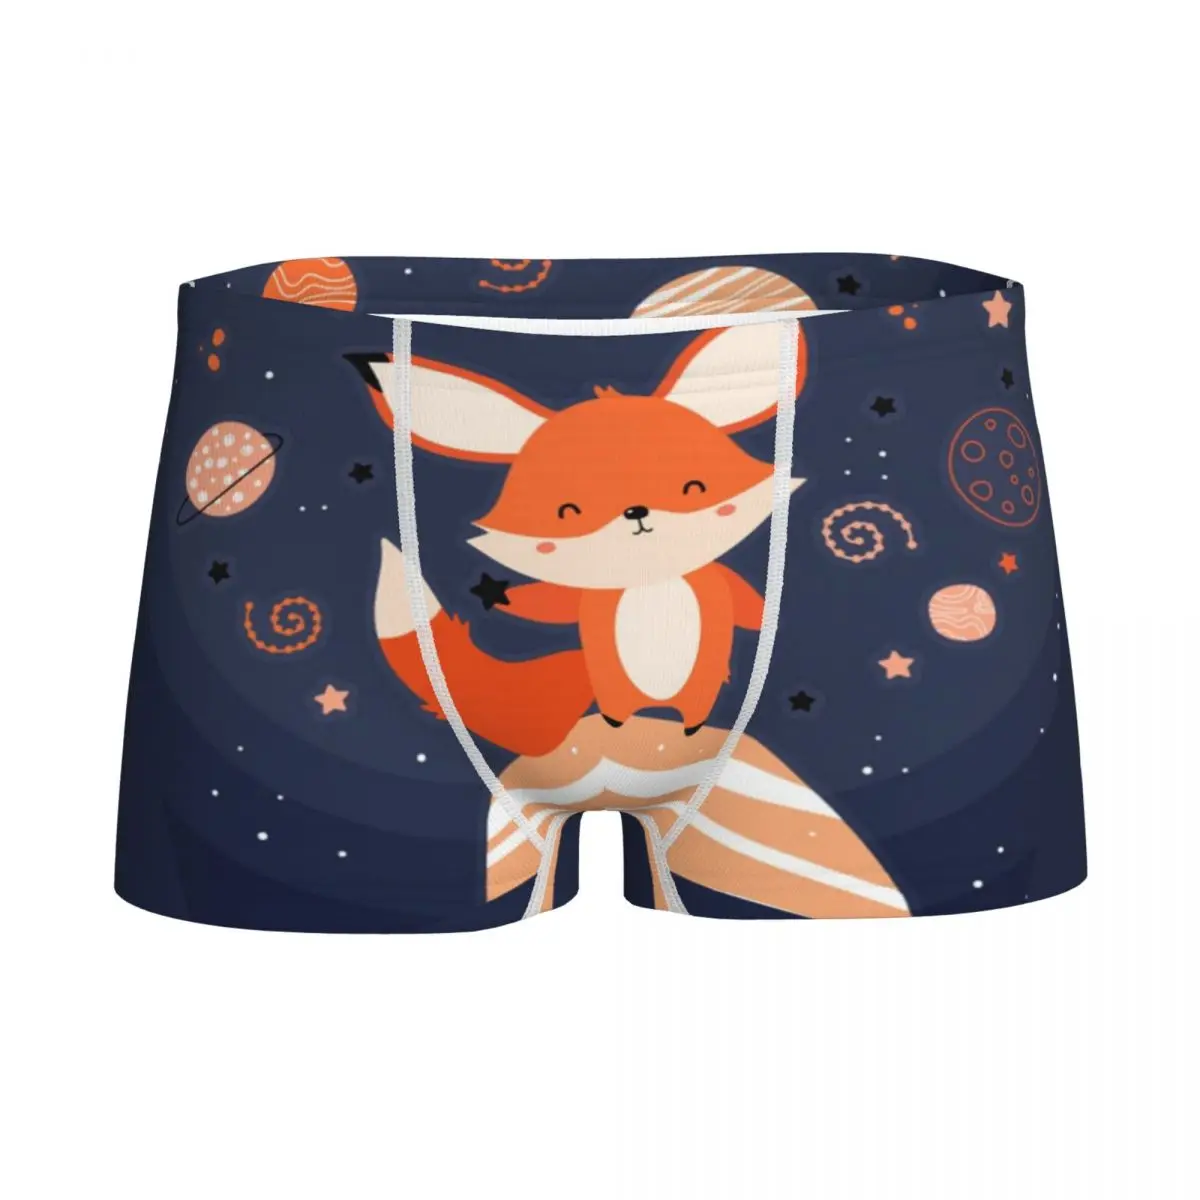 

Boys The Little Prince Fox Boxer Shorts Cotton Youth Soft Underwear Prince Rose France Stars Shorts Panties Teenagers Underpants